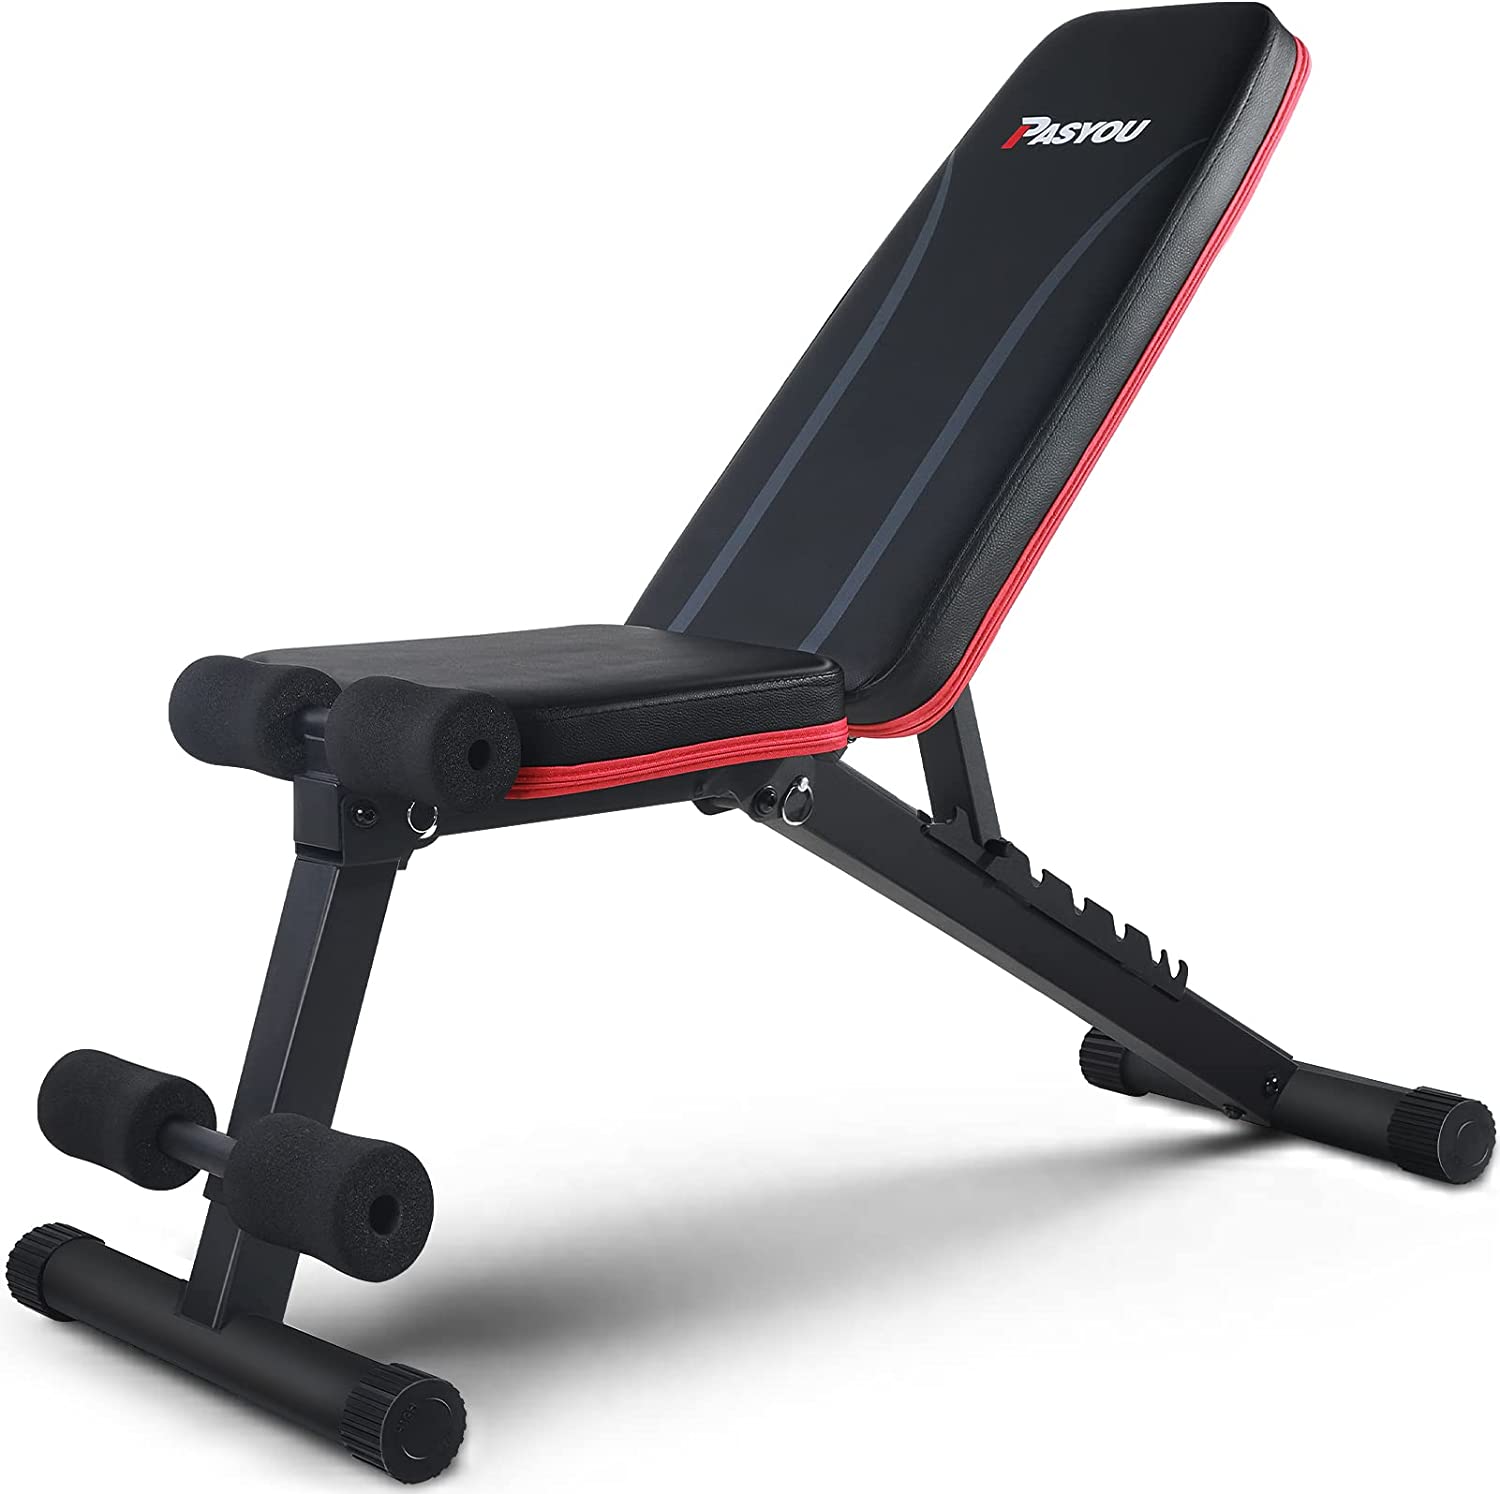 Adjustable Workout Bench Full Body Workout Multi-Purpose Foldable Incline Decline Exercise for Home Gym PA300-Trainnox